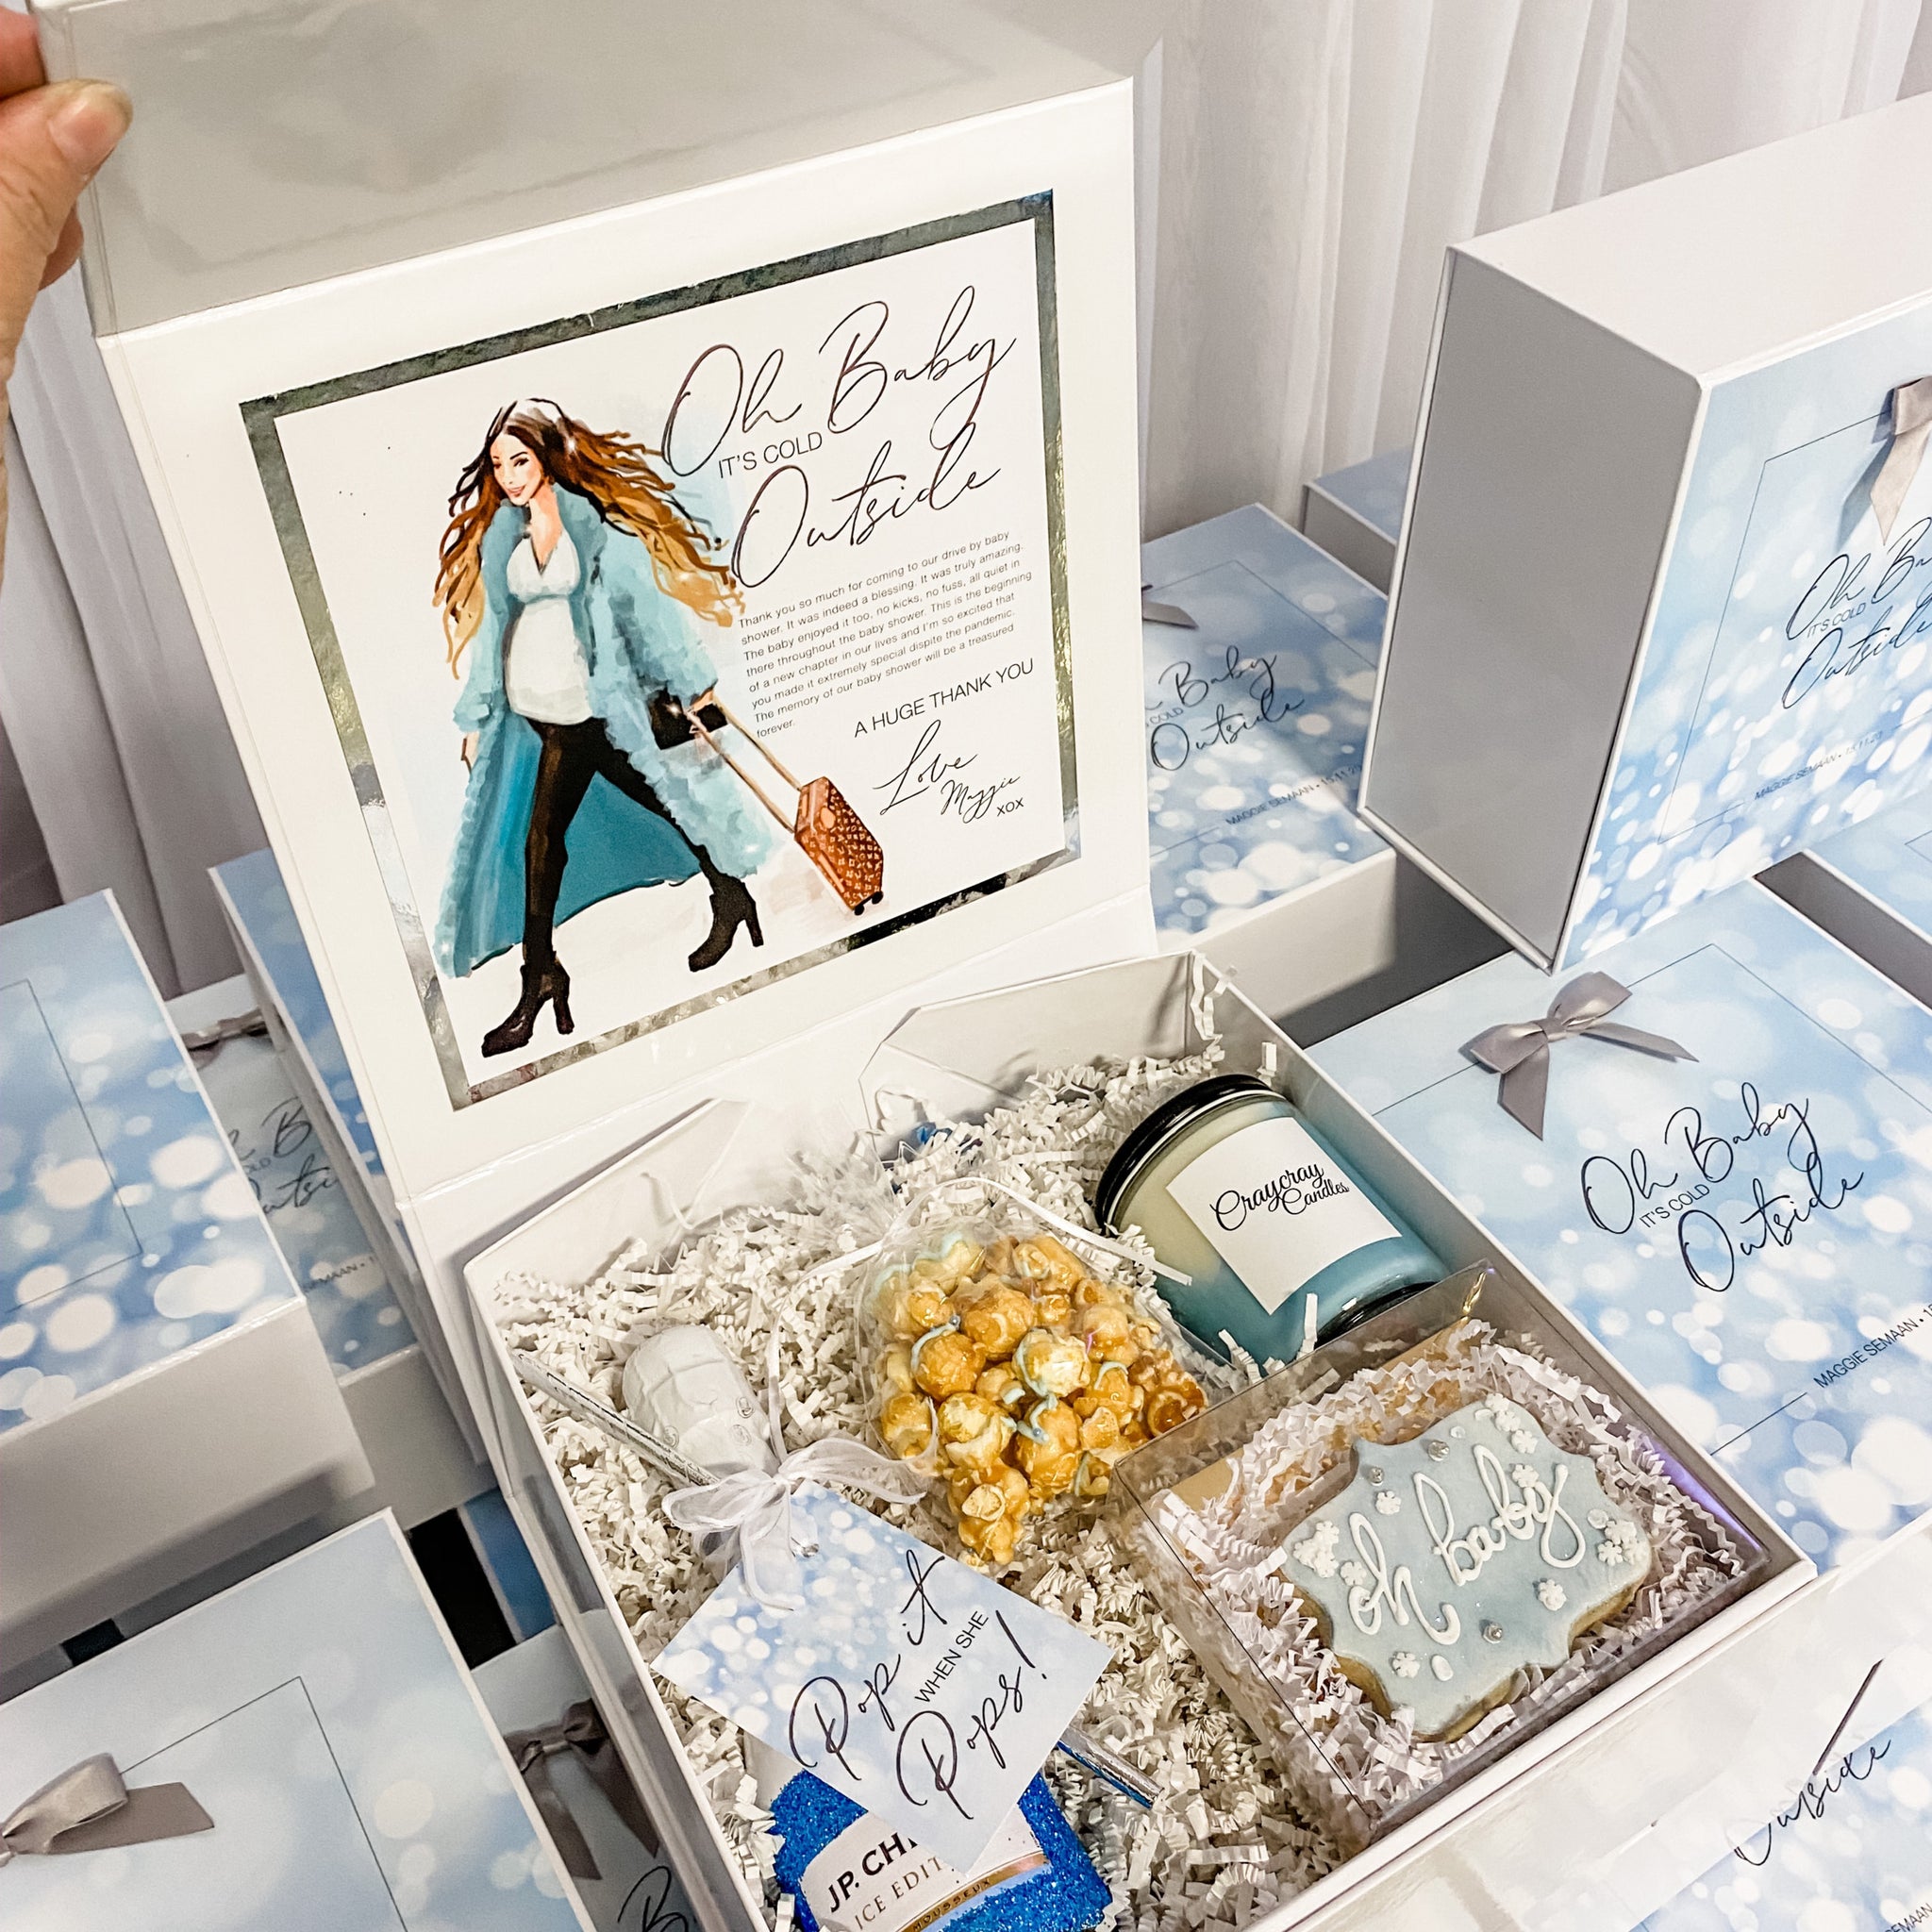 OH BABY ITS COLD OUTSIDE GUEST GIFT BOX